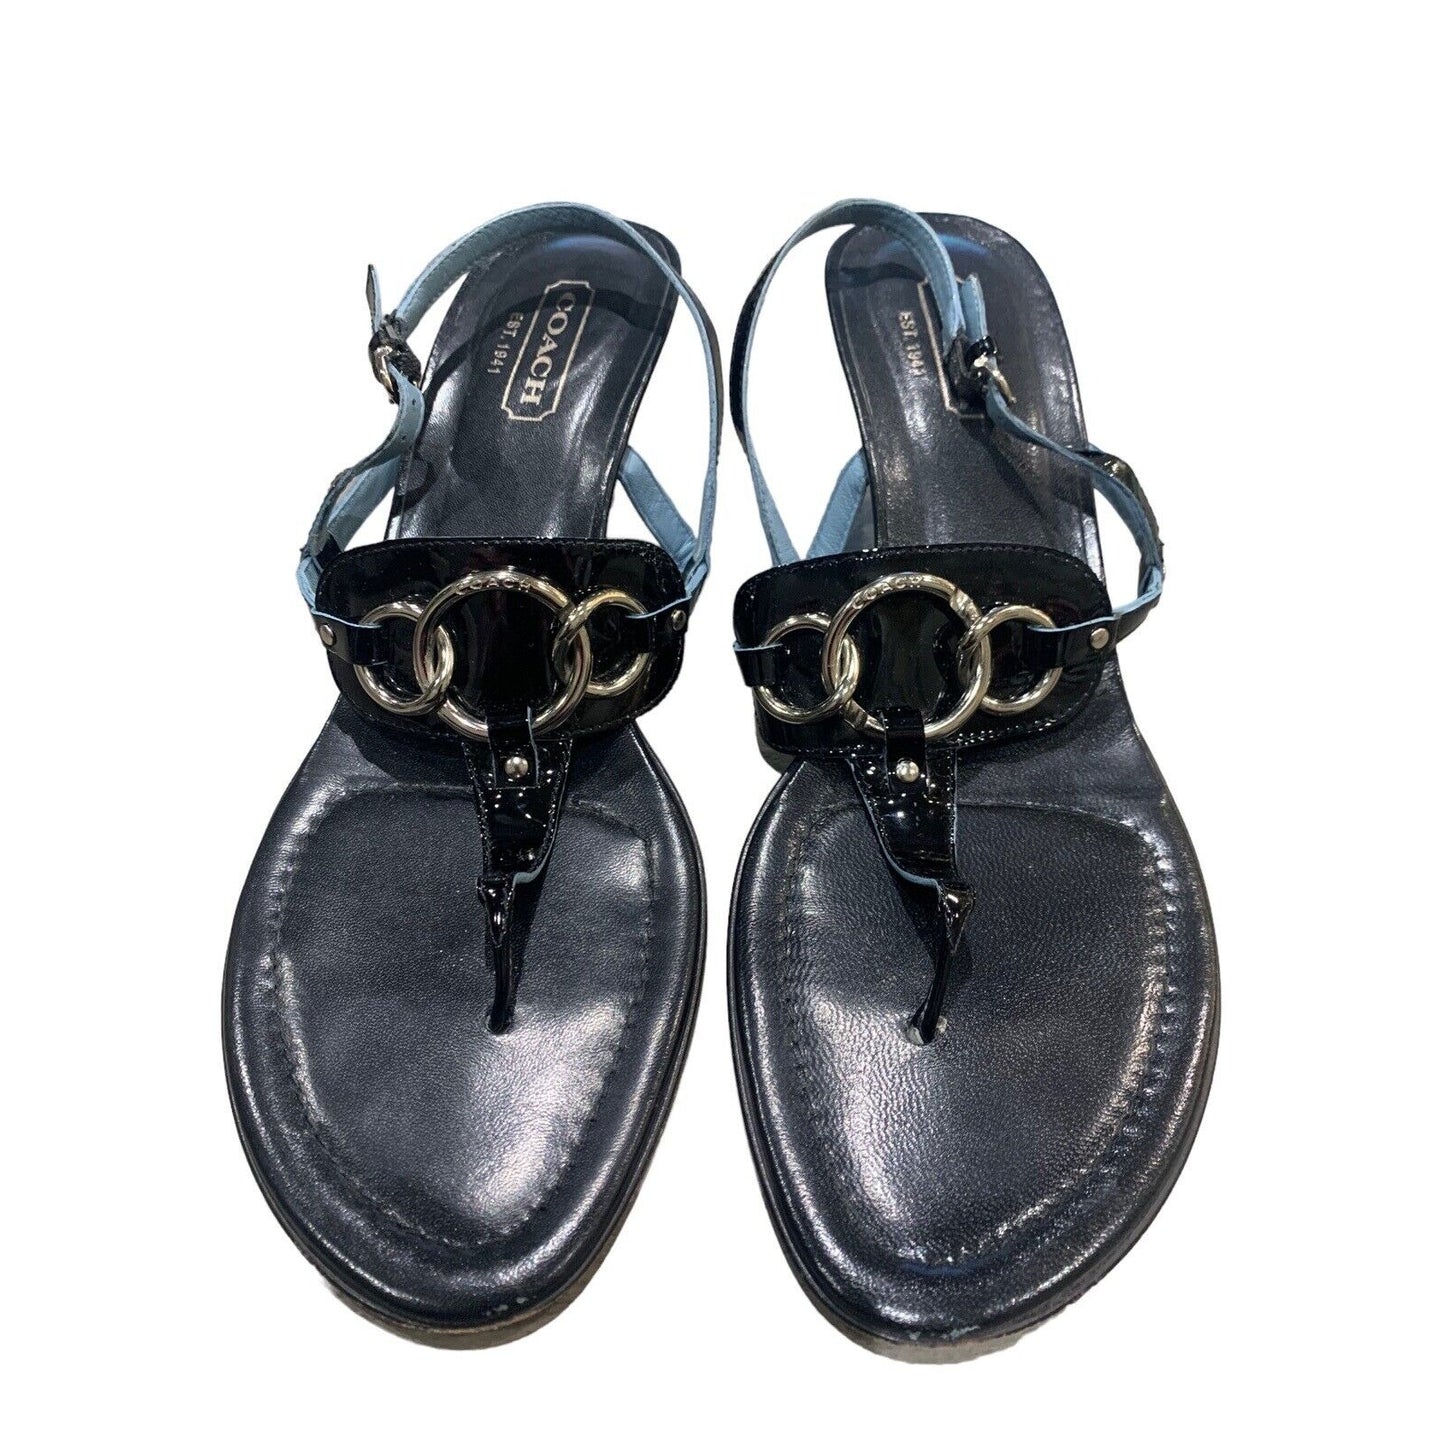 Coach Women's Gladys Patent Leather Thong Sandal with Ankle Strap